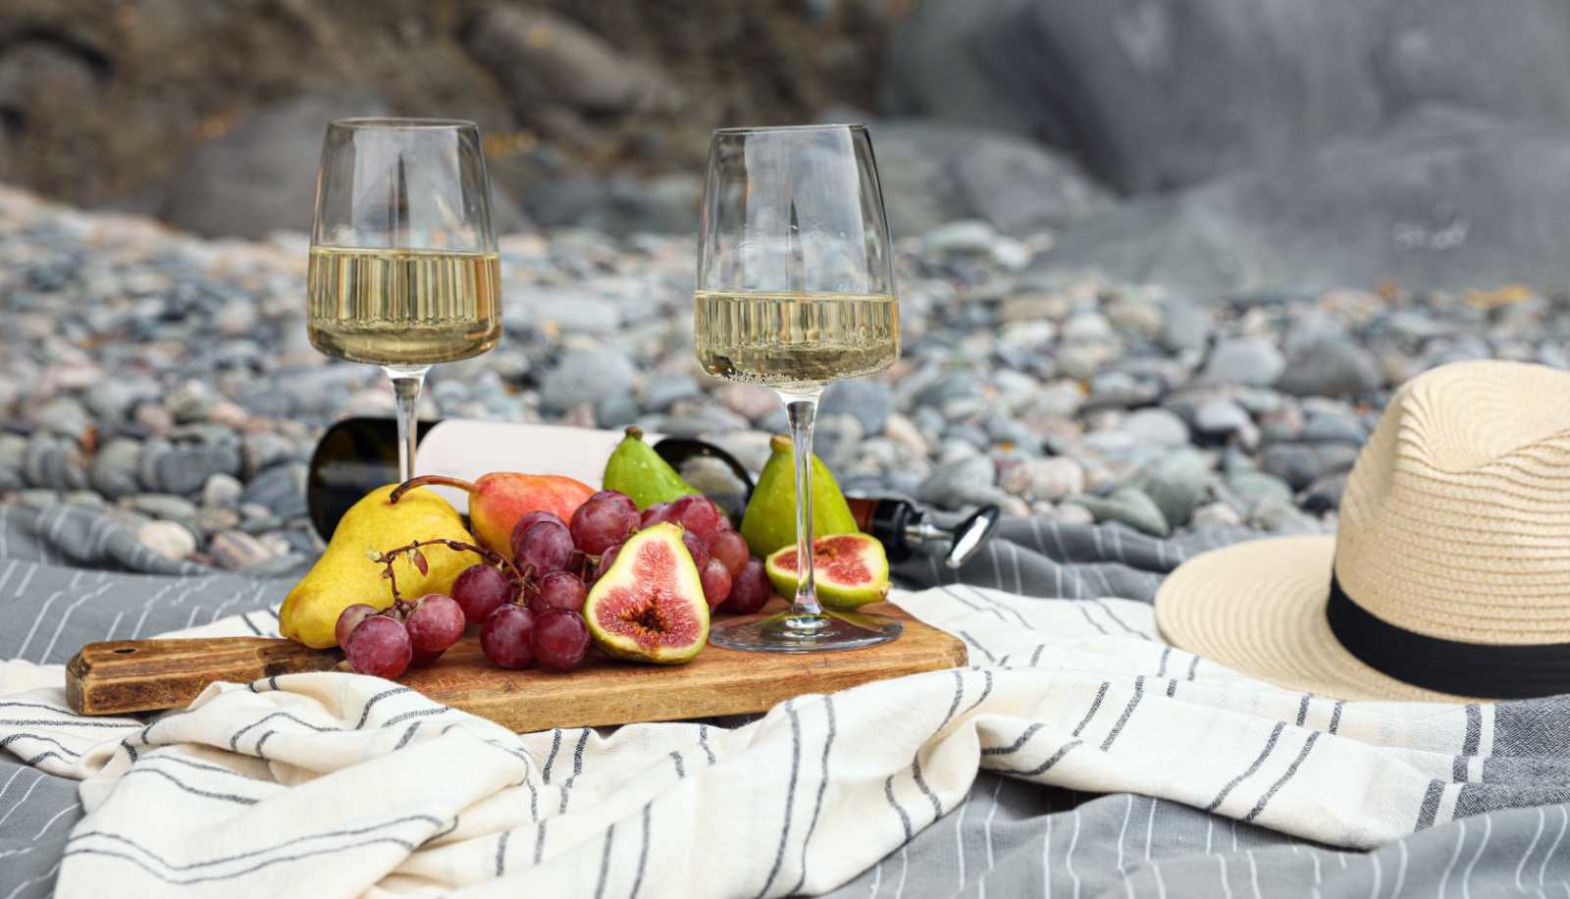 Glasses of white wine on a fruit board at a picnic on the beach - types of white wine